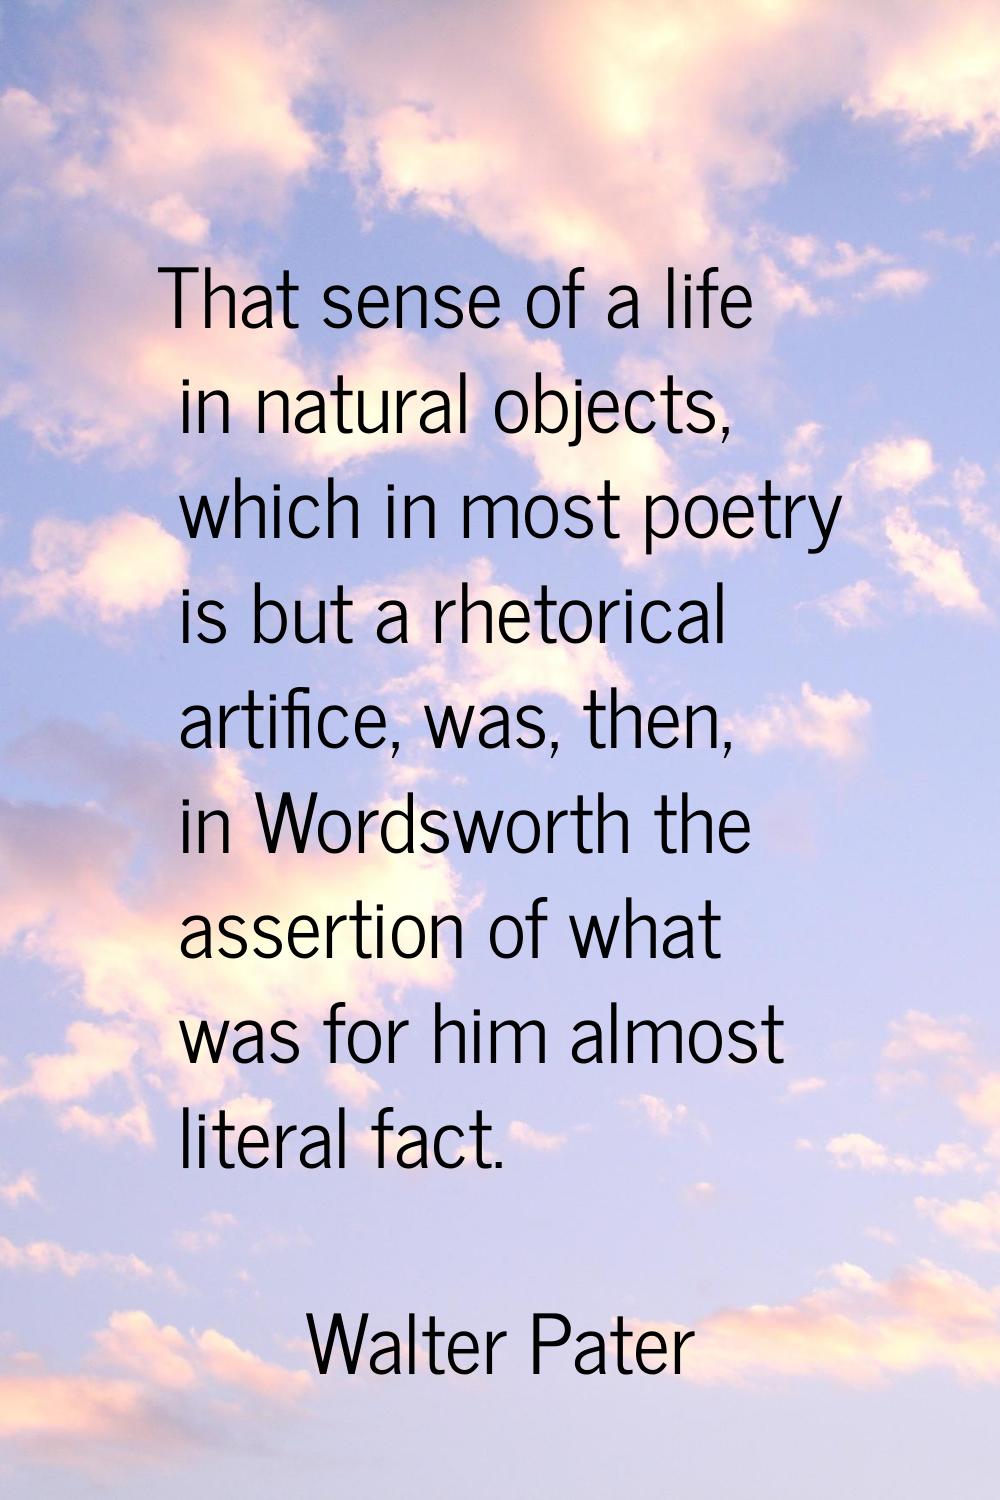 That sense of a life in natural objects, which in most poetry is but a rhetorical artifice, was, th